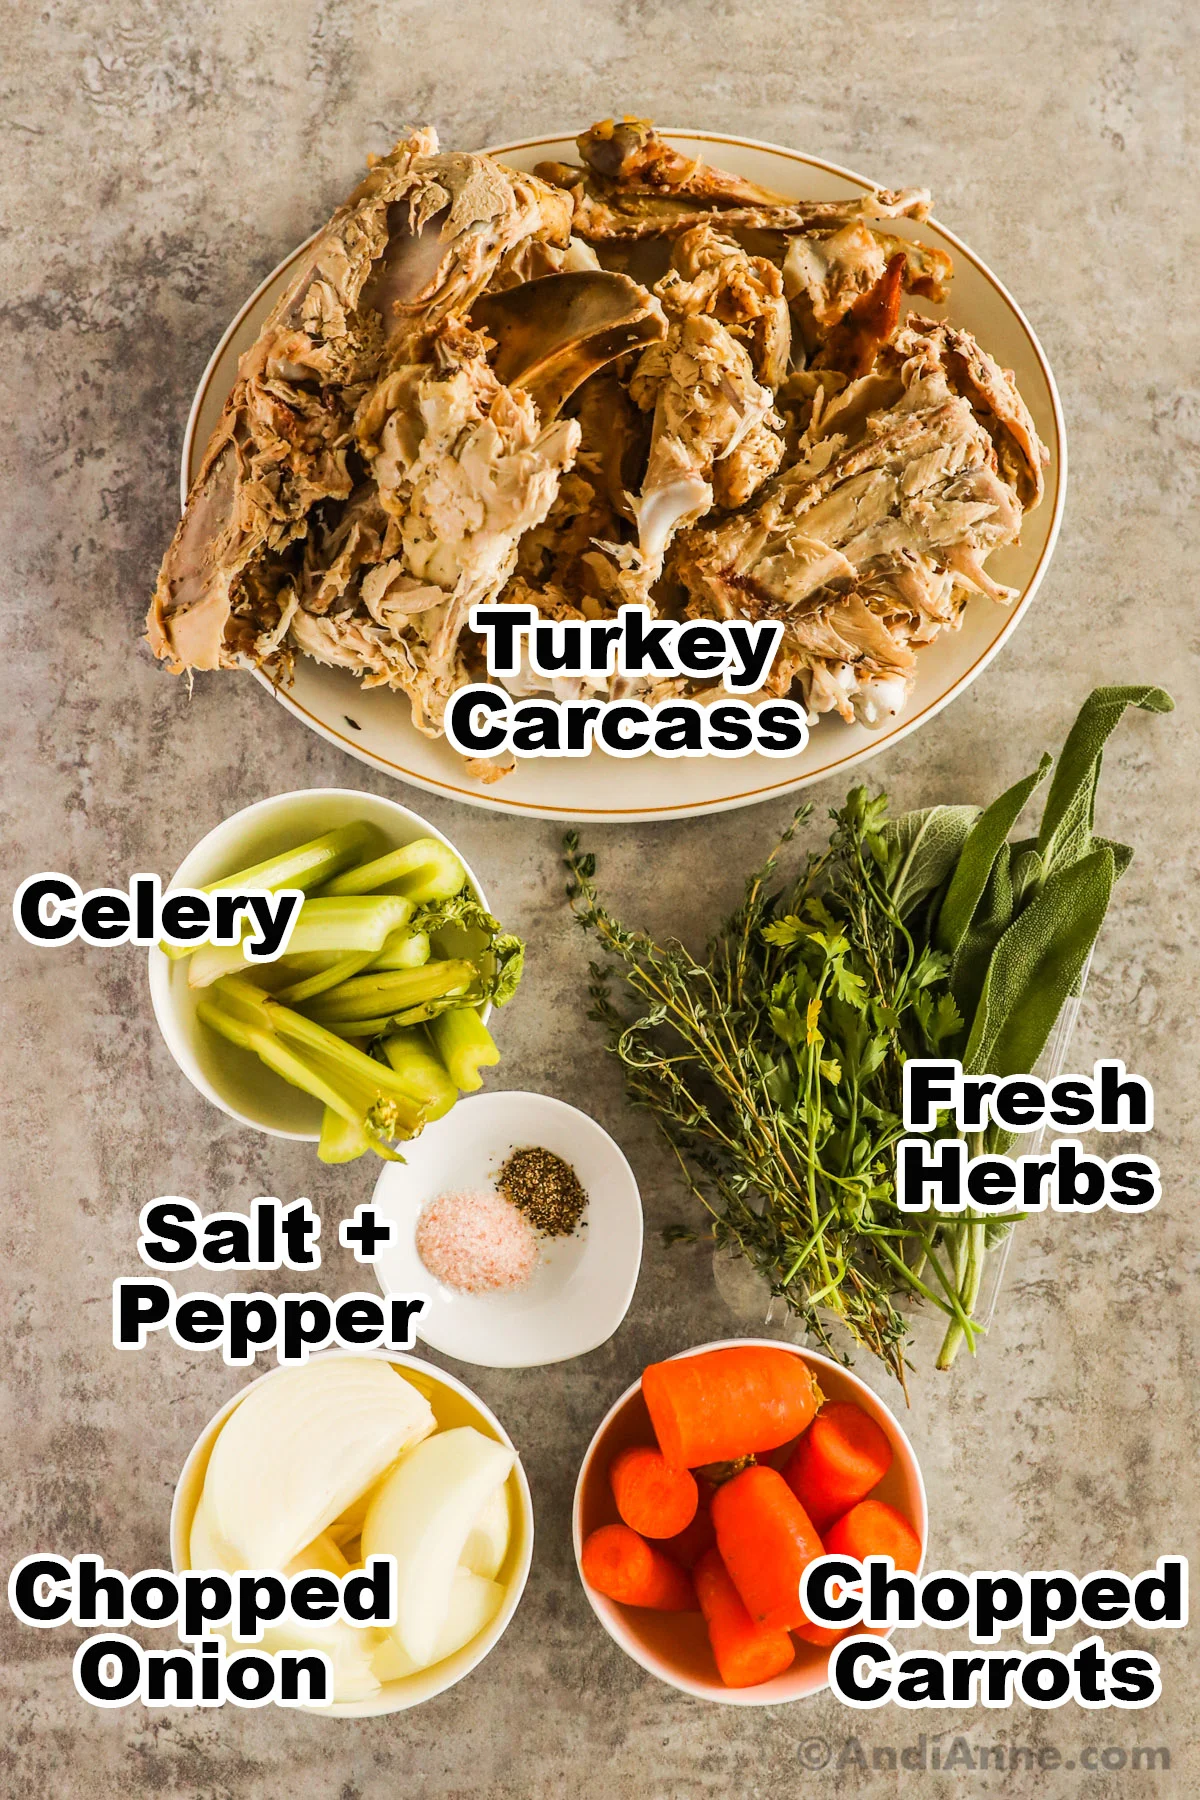 Recipe ingredients including plate with turkey carcass, bowl of celery, fresh herbs, salt and pepper, chopped onion and chopped carrots.